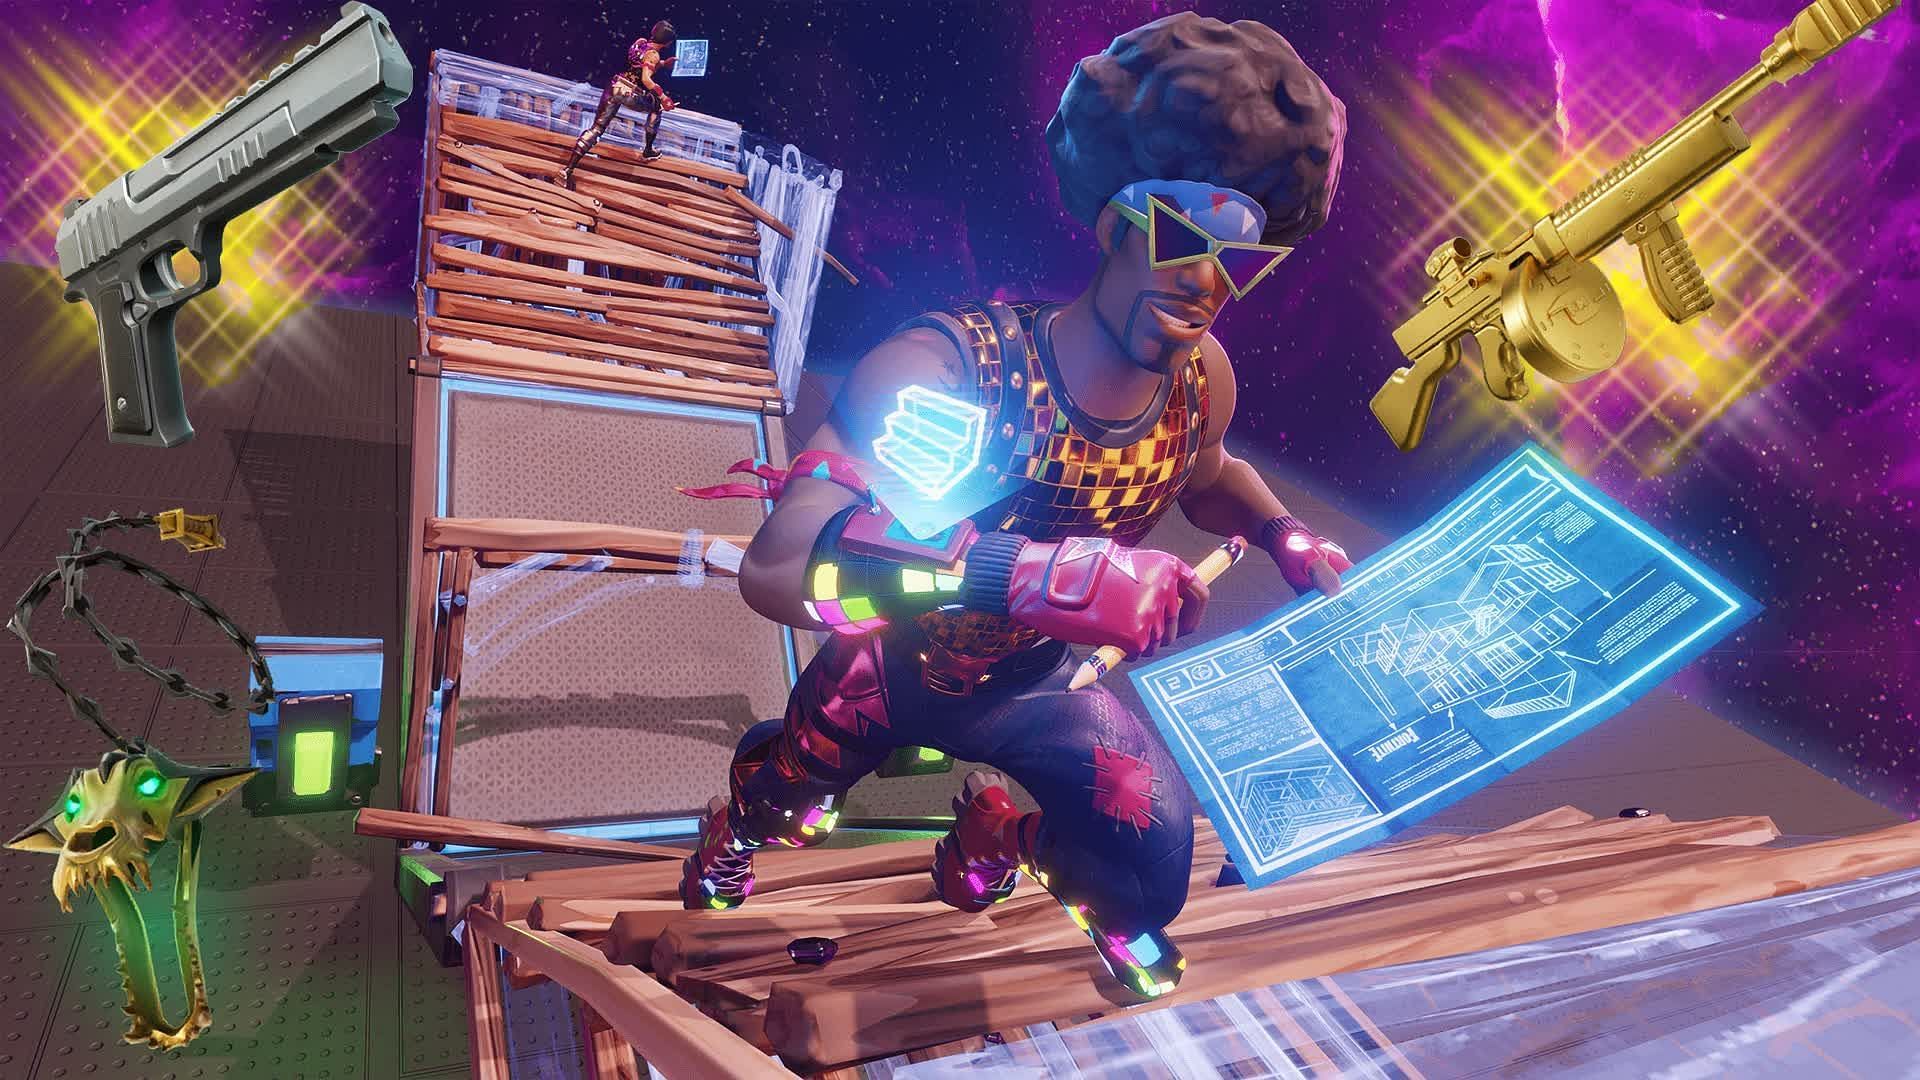 Fortnite BHE 1v1 Build Fights: UEFN map code, how to play, and more